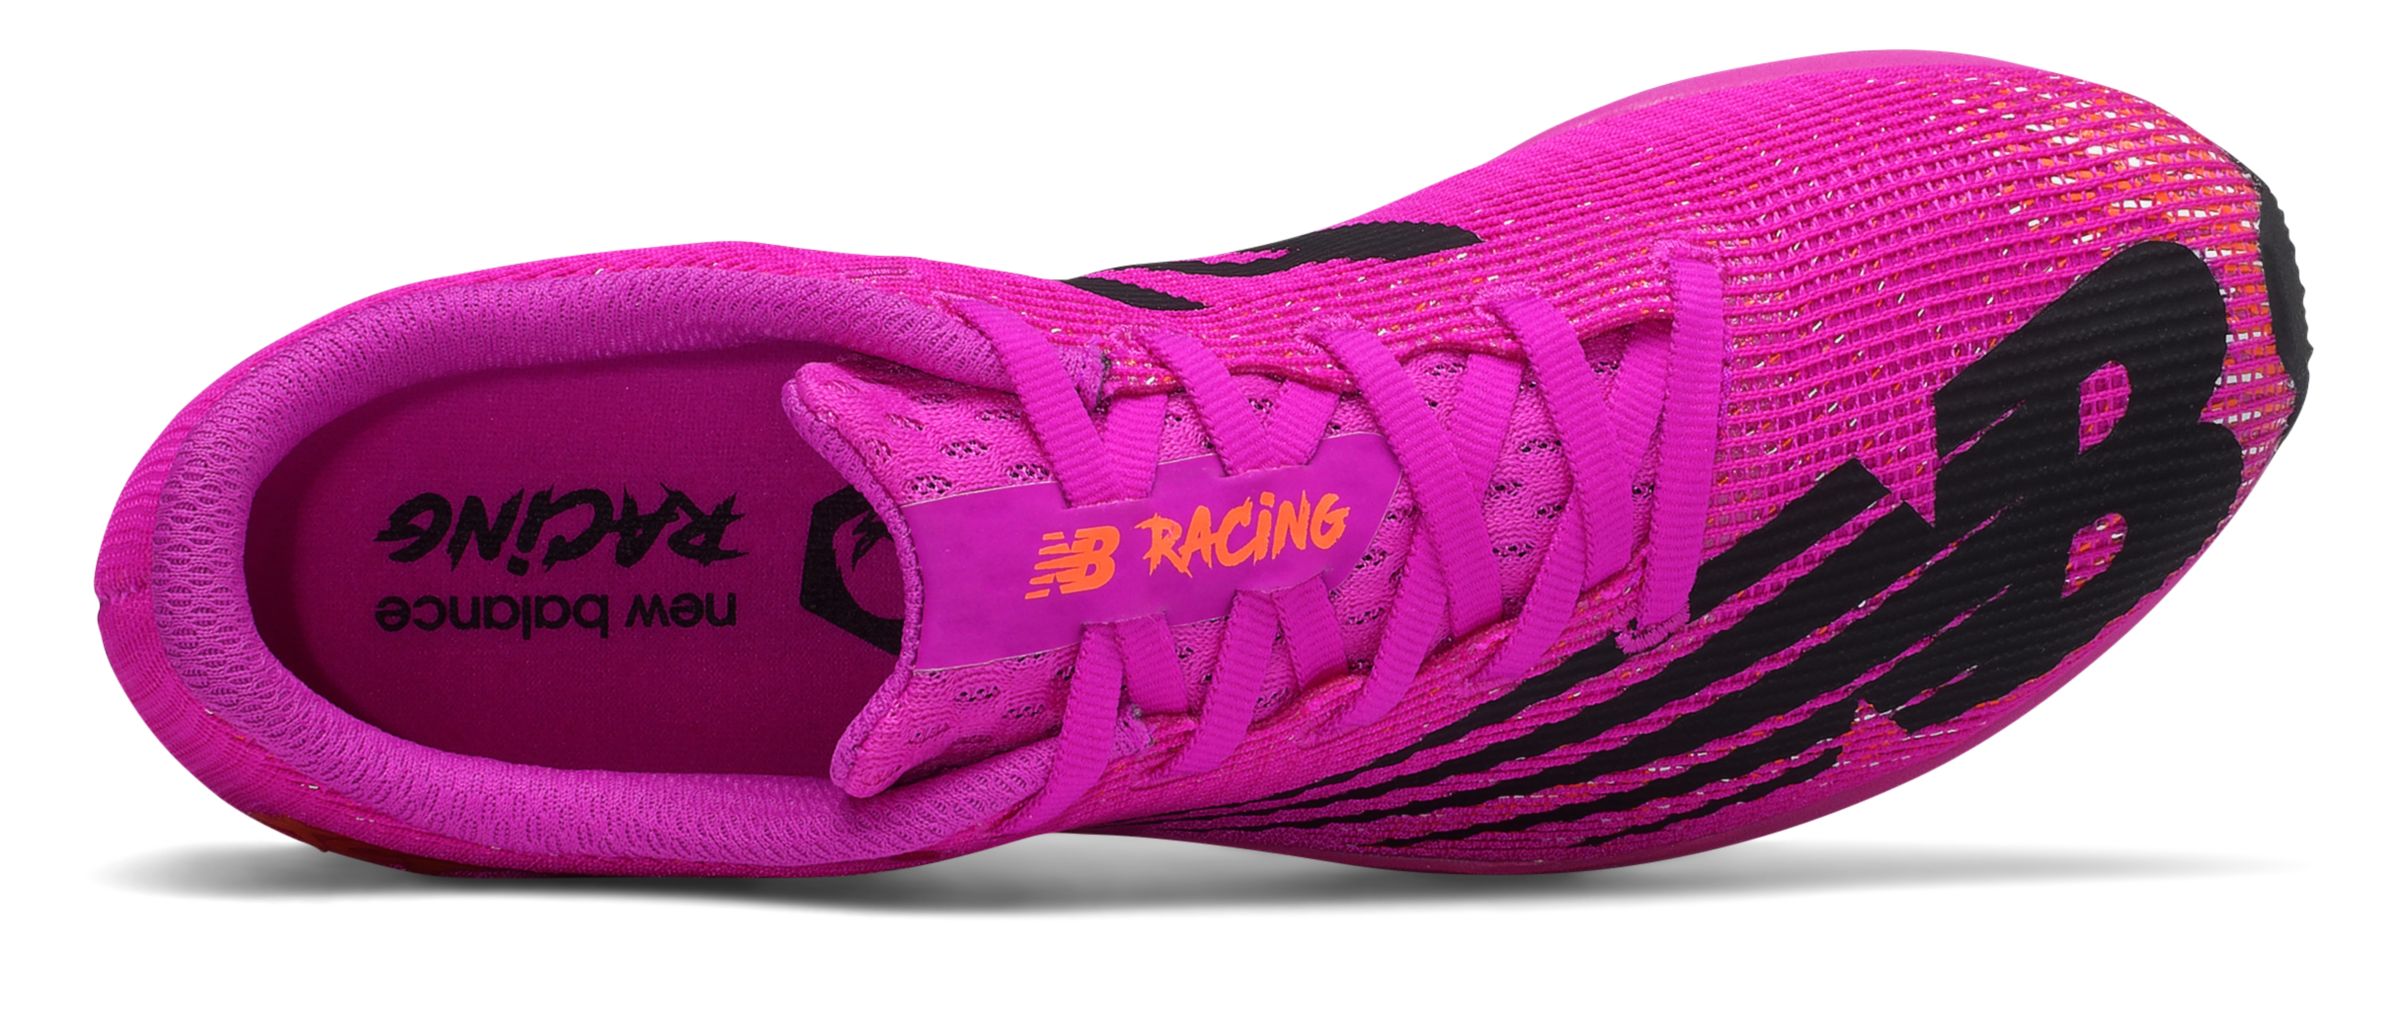 new balance xc seven review